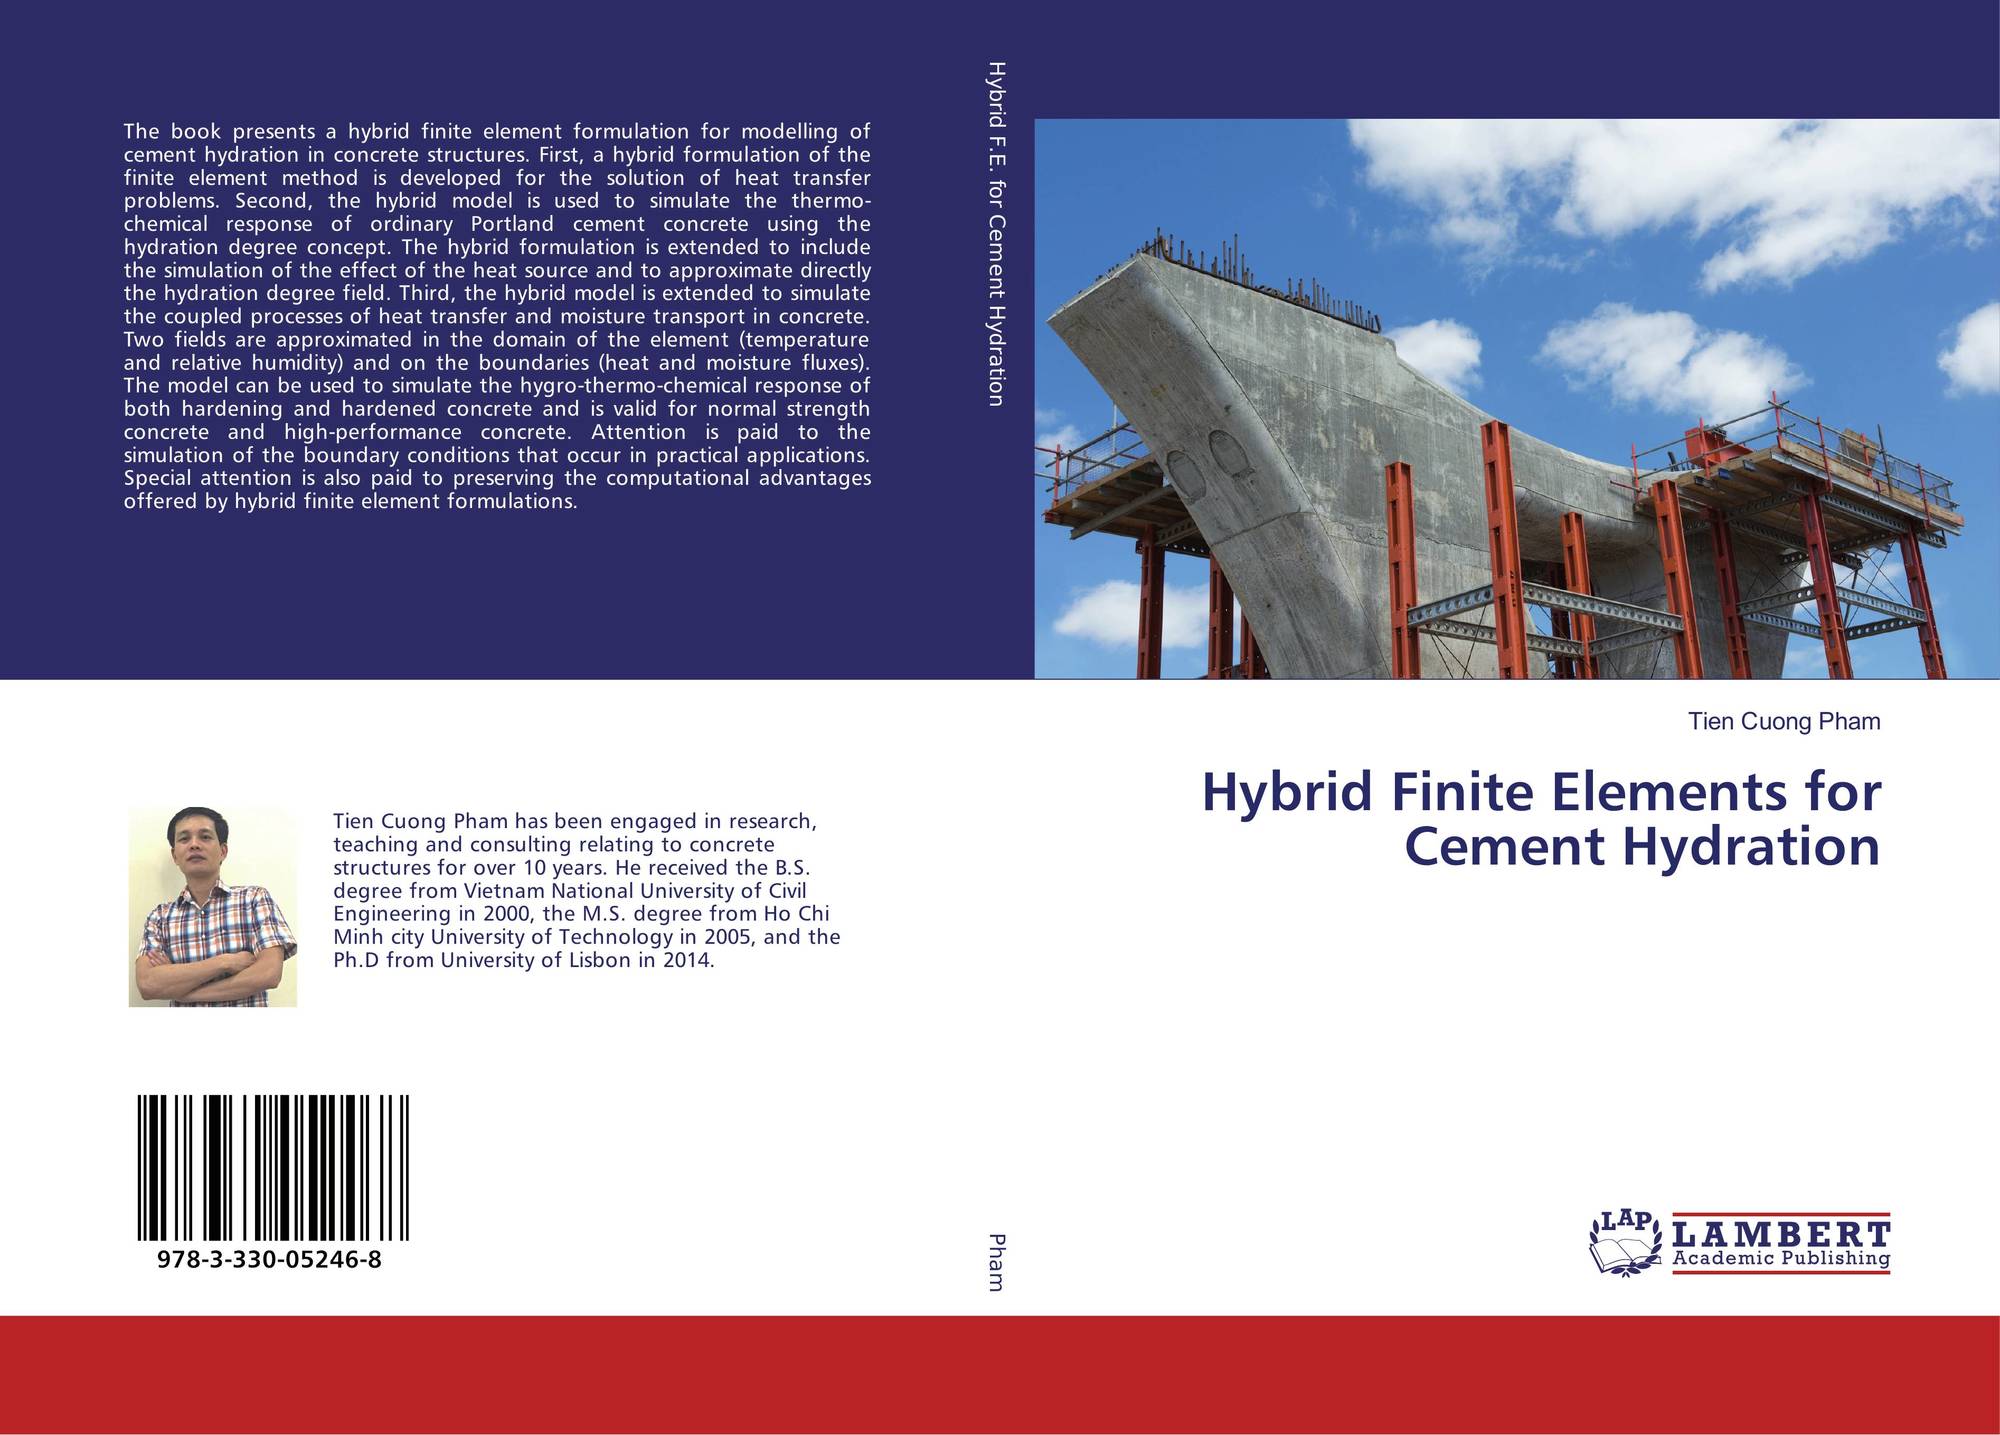 Hybrid Finite Elements for Cement Hydration, 978-3-330-05246-8